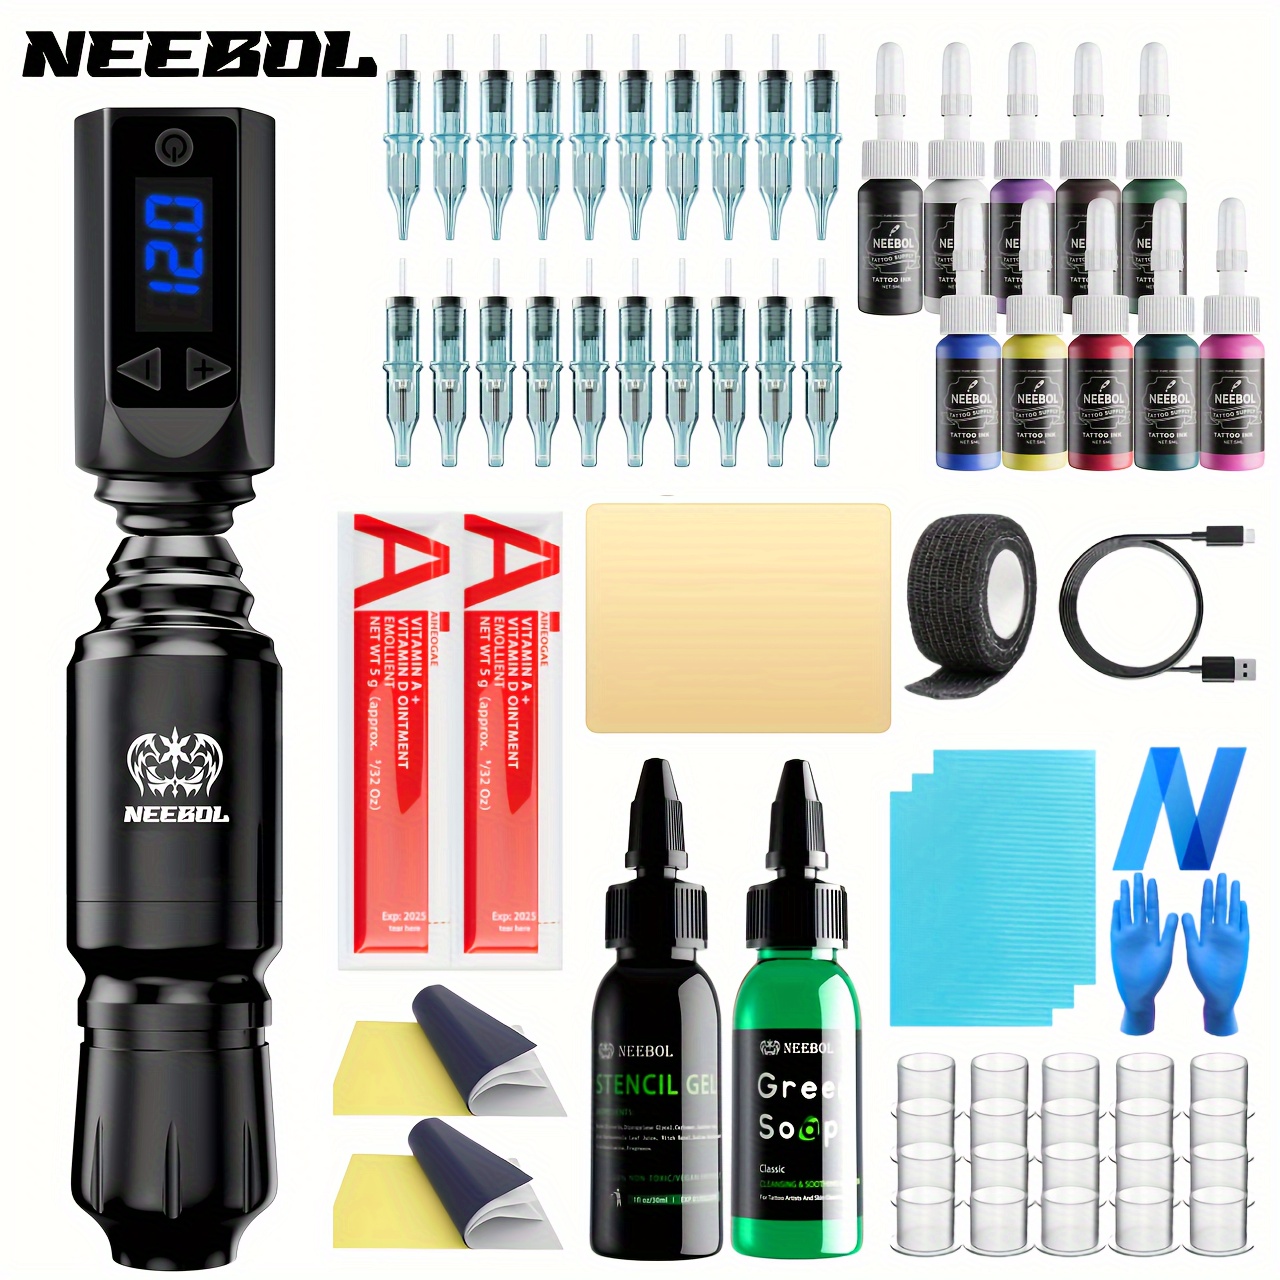  Tattoo Kit - Ambition Complete Wireless Tattoo Machine Kit  1950mAh Digital LED Display Power Supply with 40pcs Tattoo Cartridges  Needles Ink Cup Gloves Bandage for Professional Tattoo Artists : Beauty 